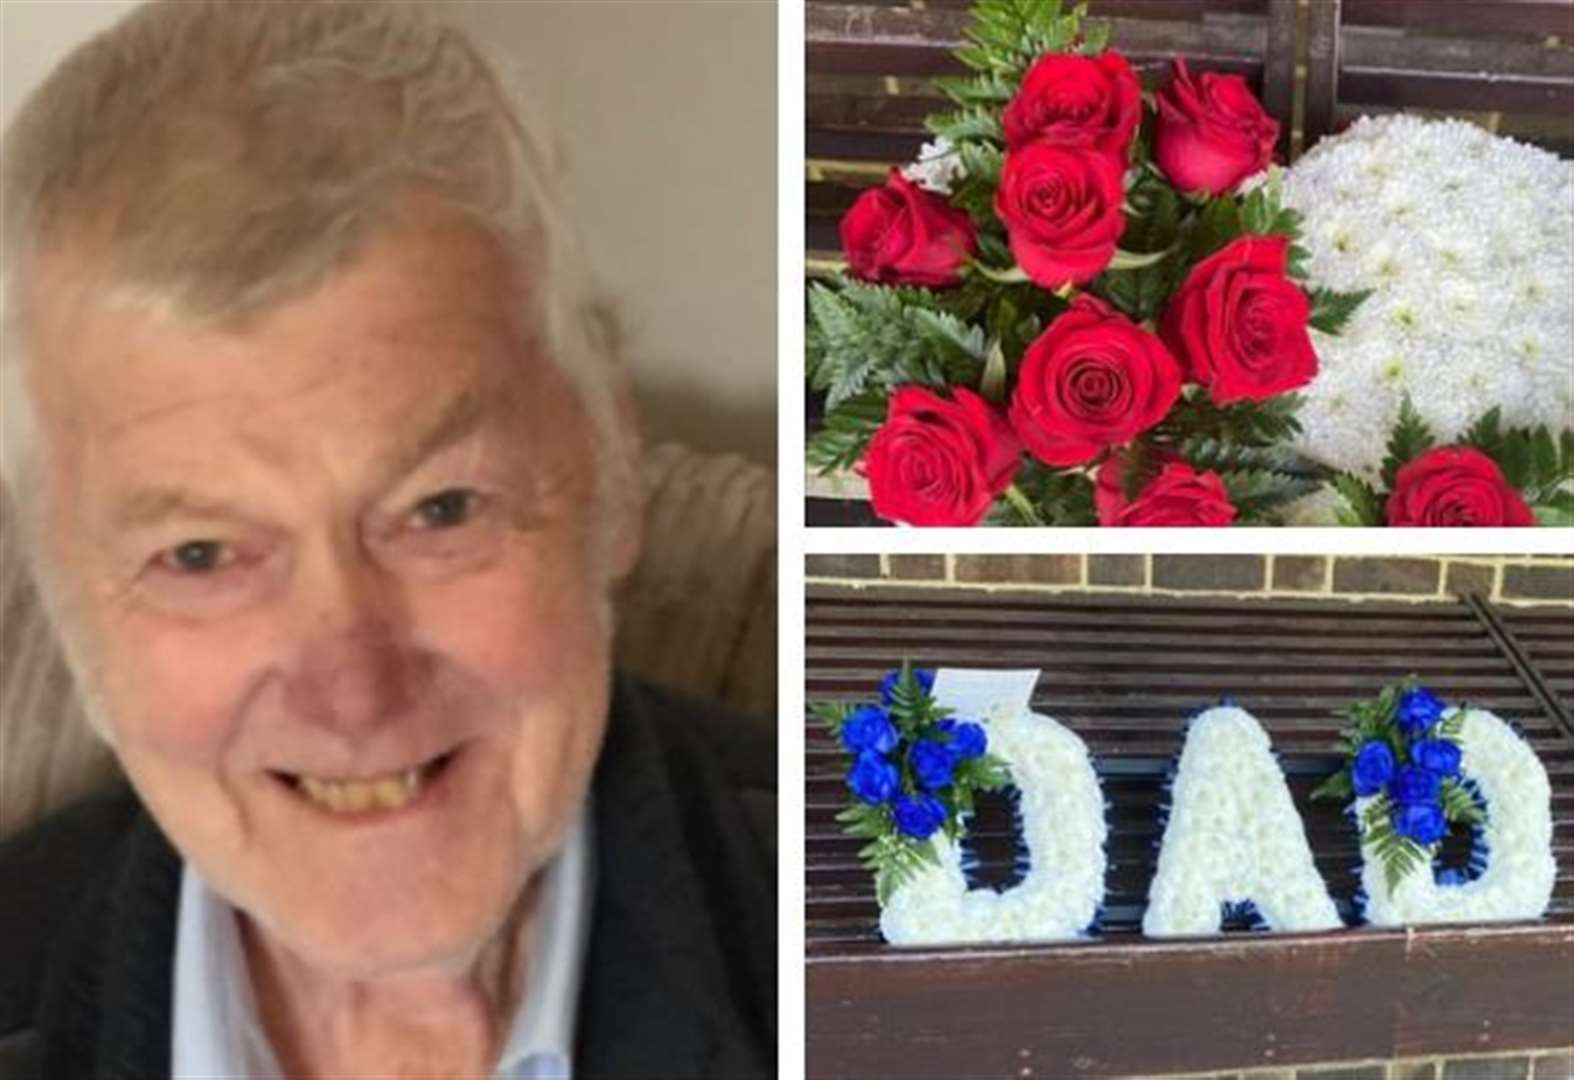 'Thieves who stole dad's funeral flowers are lowest of the low'